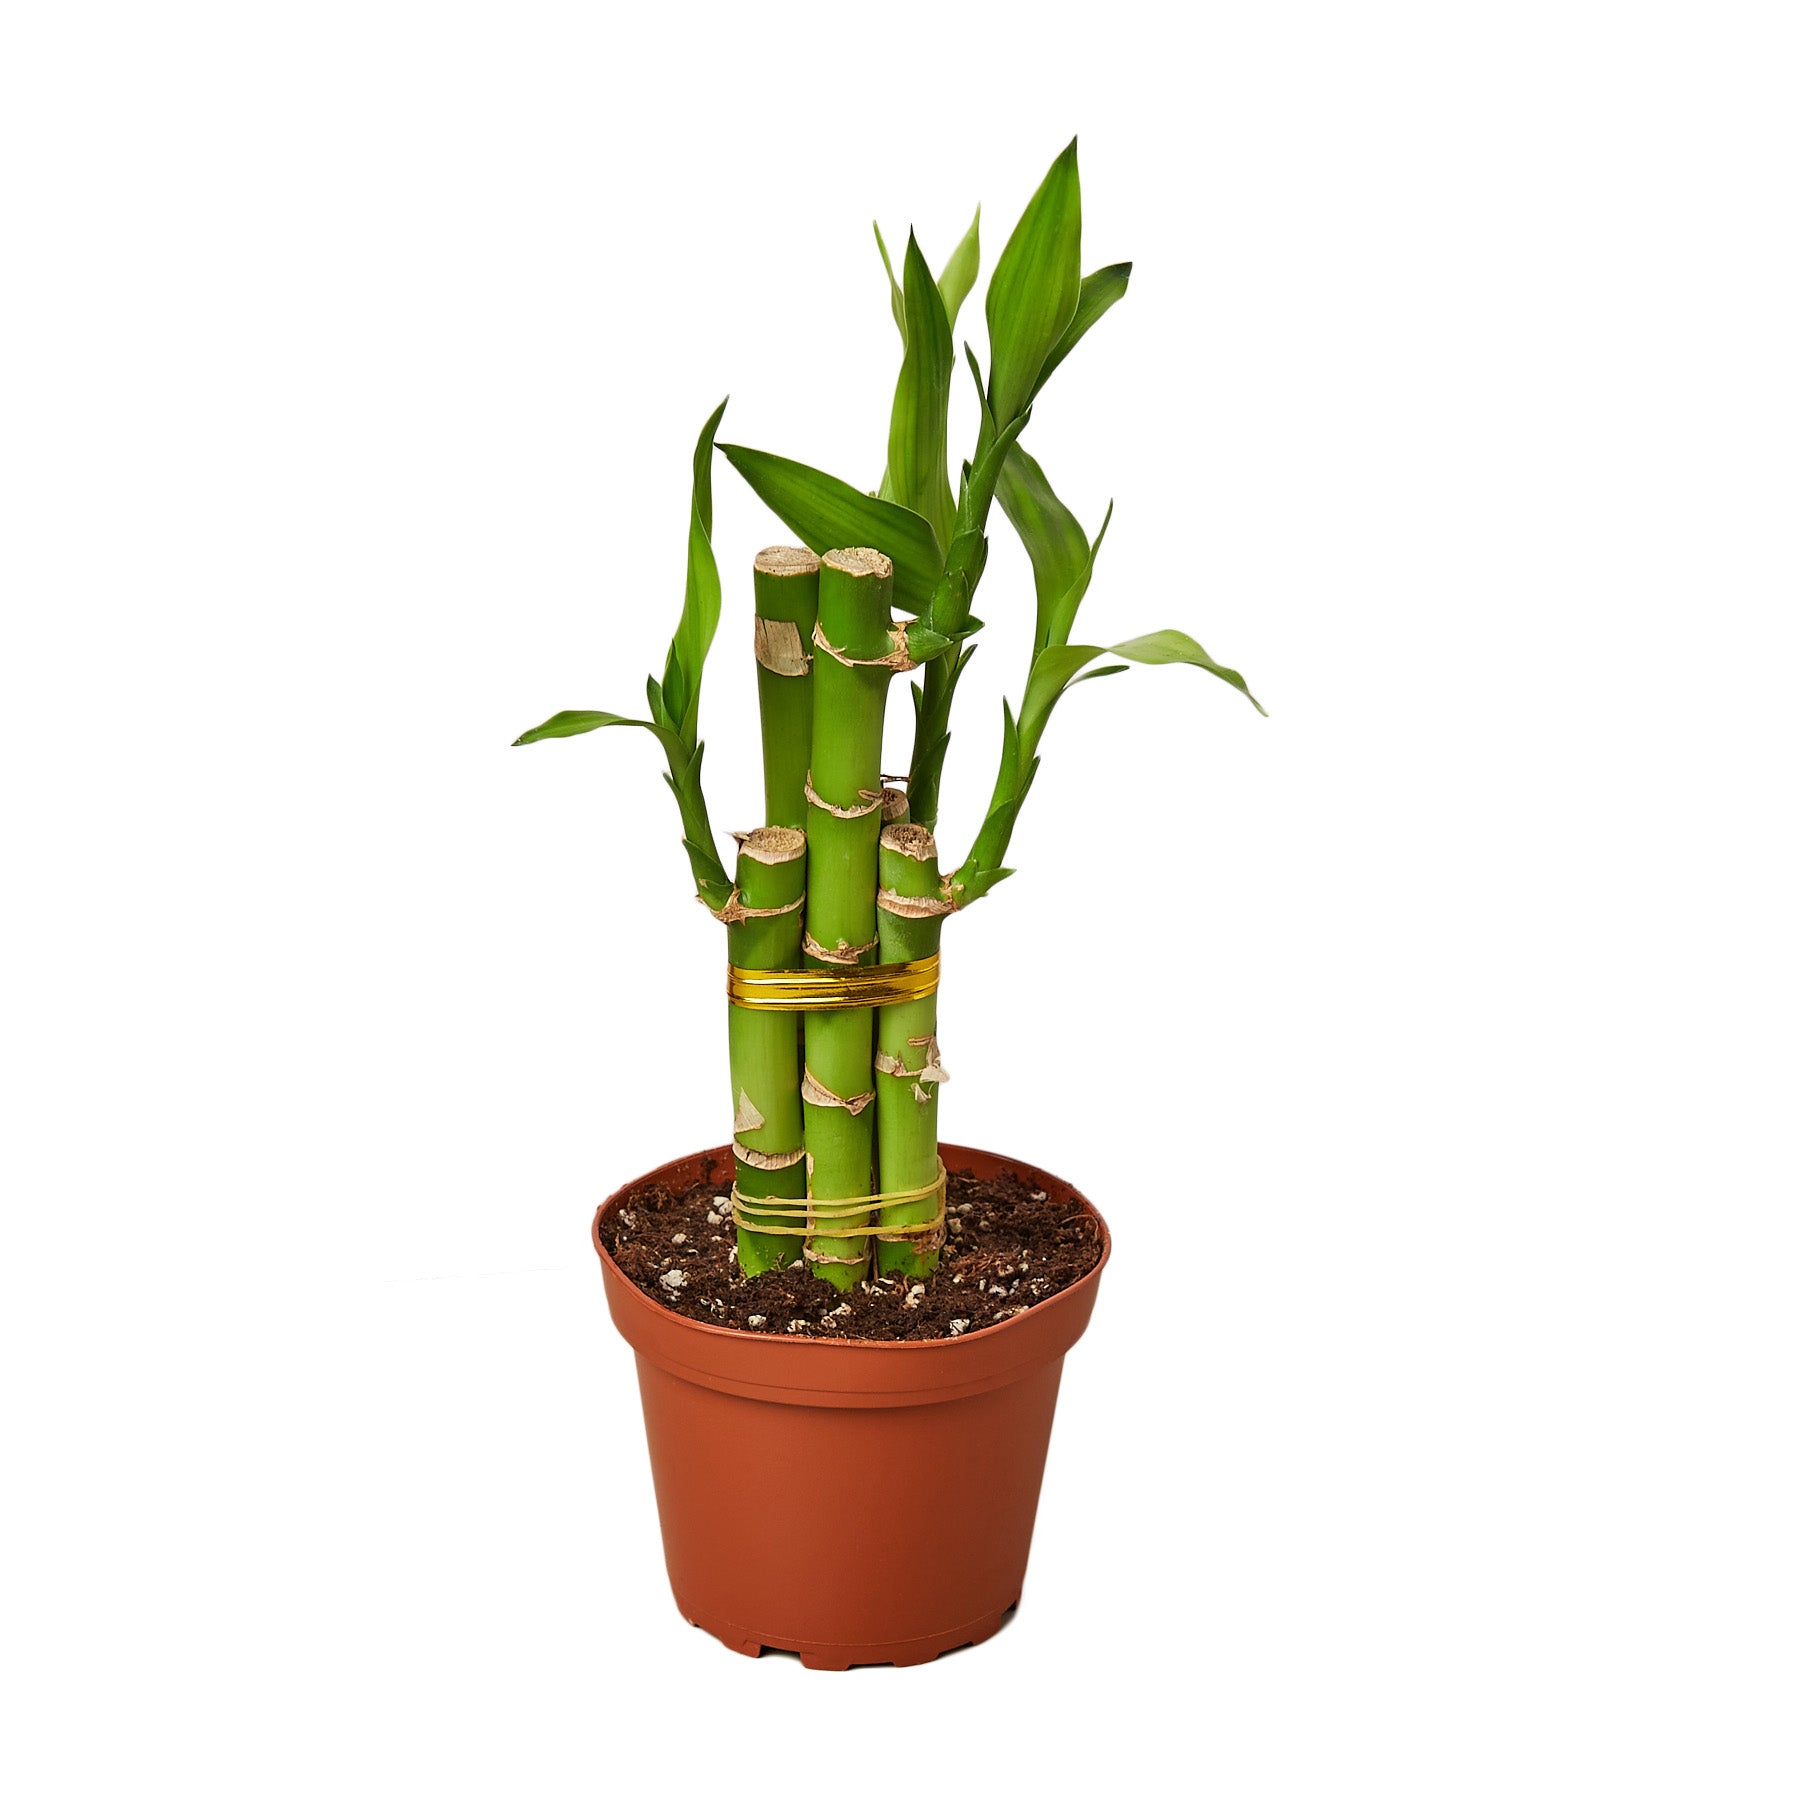 A bamboo plant in a pot on a white background from the best plant nursery near me